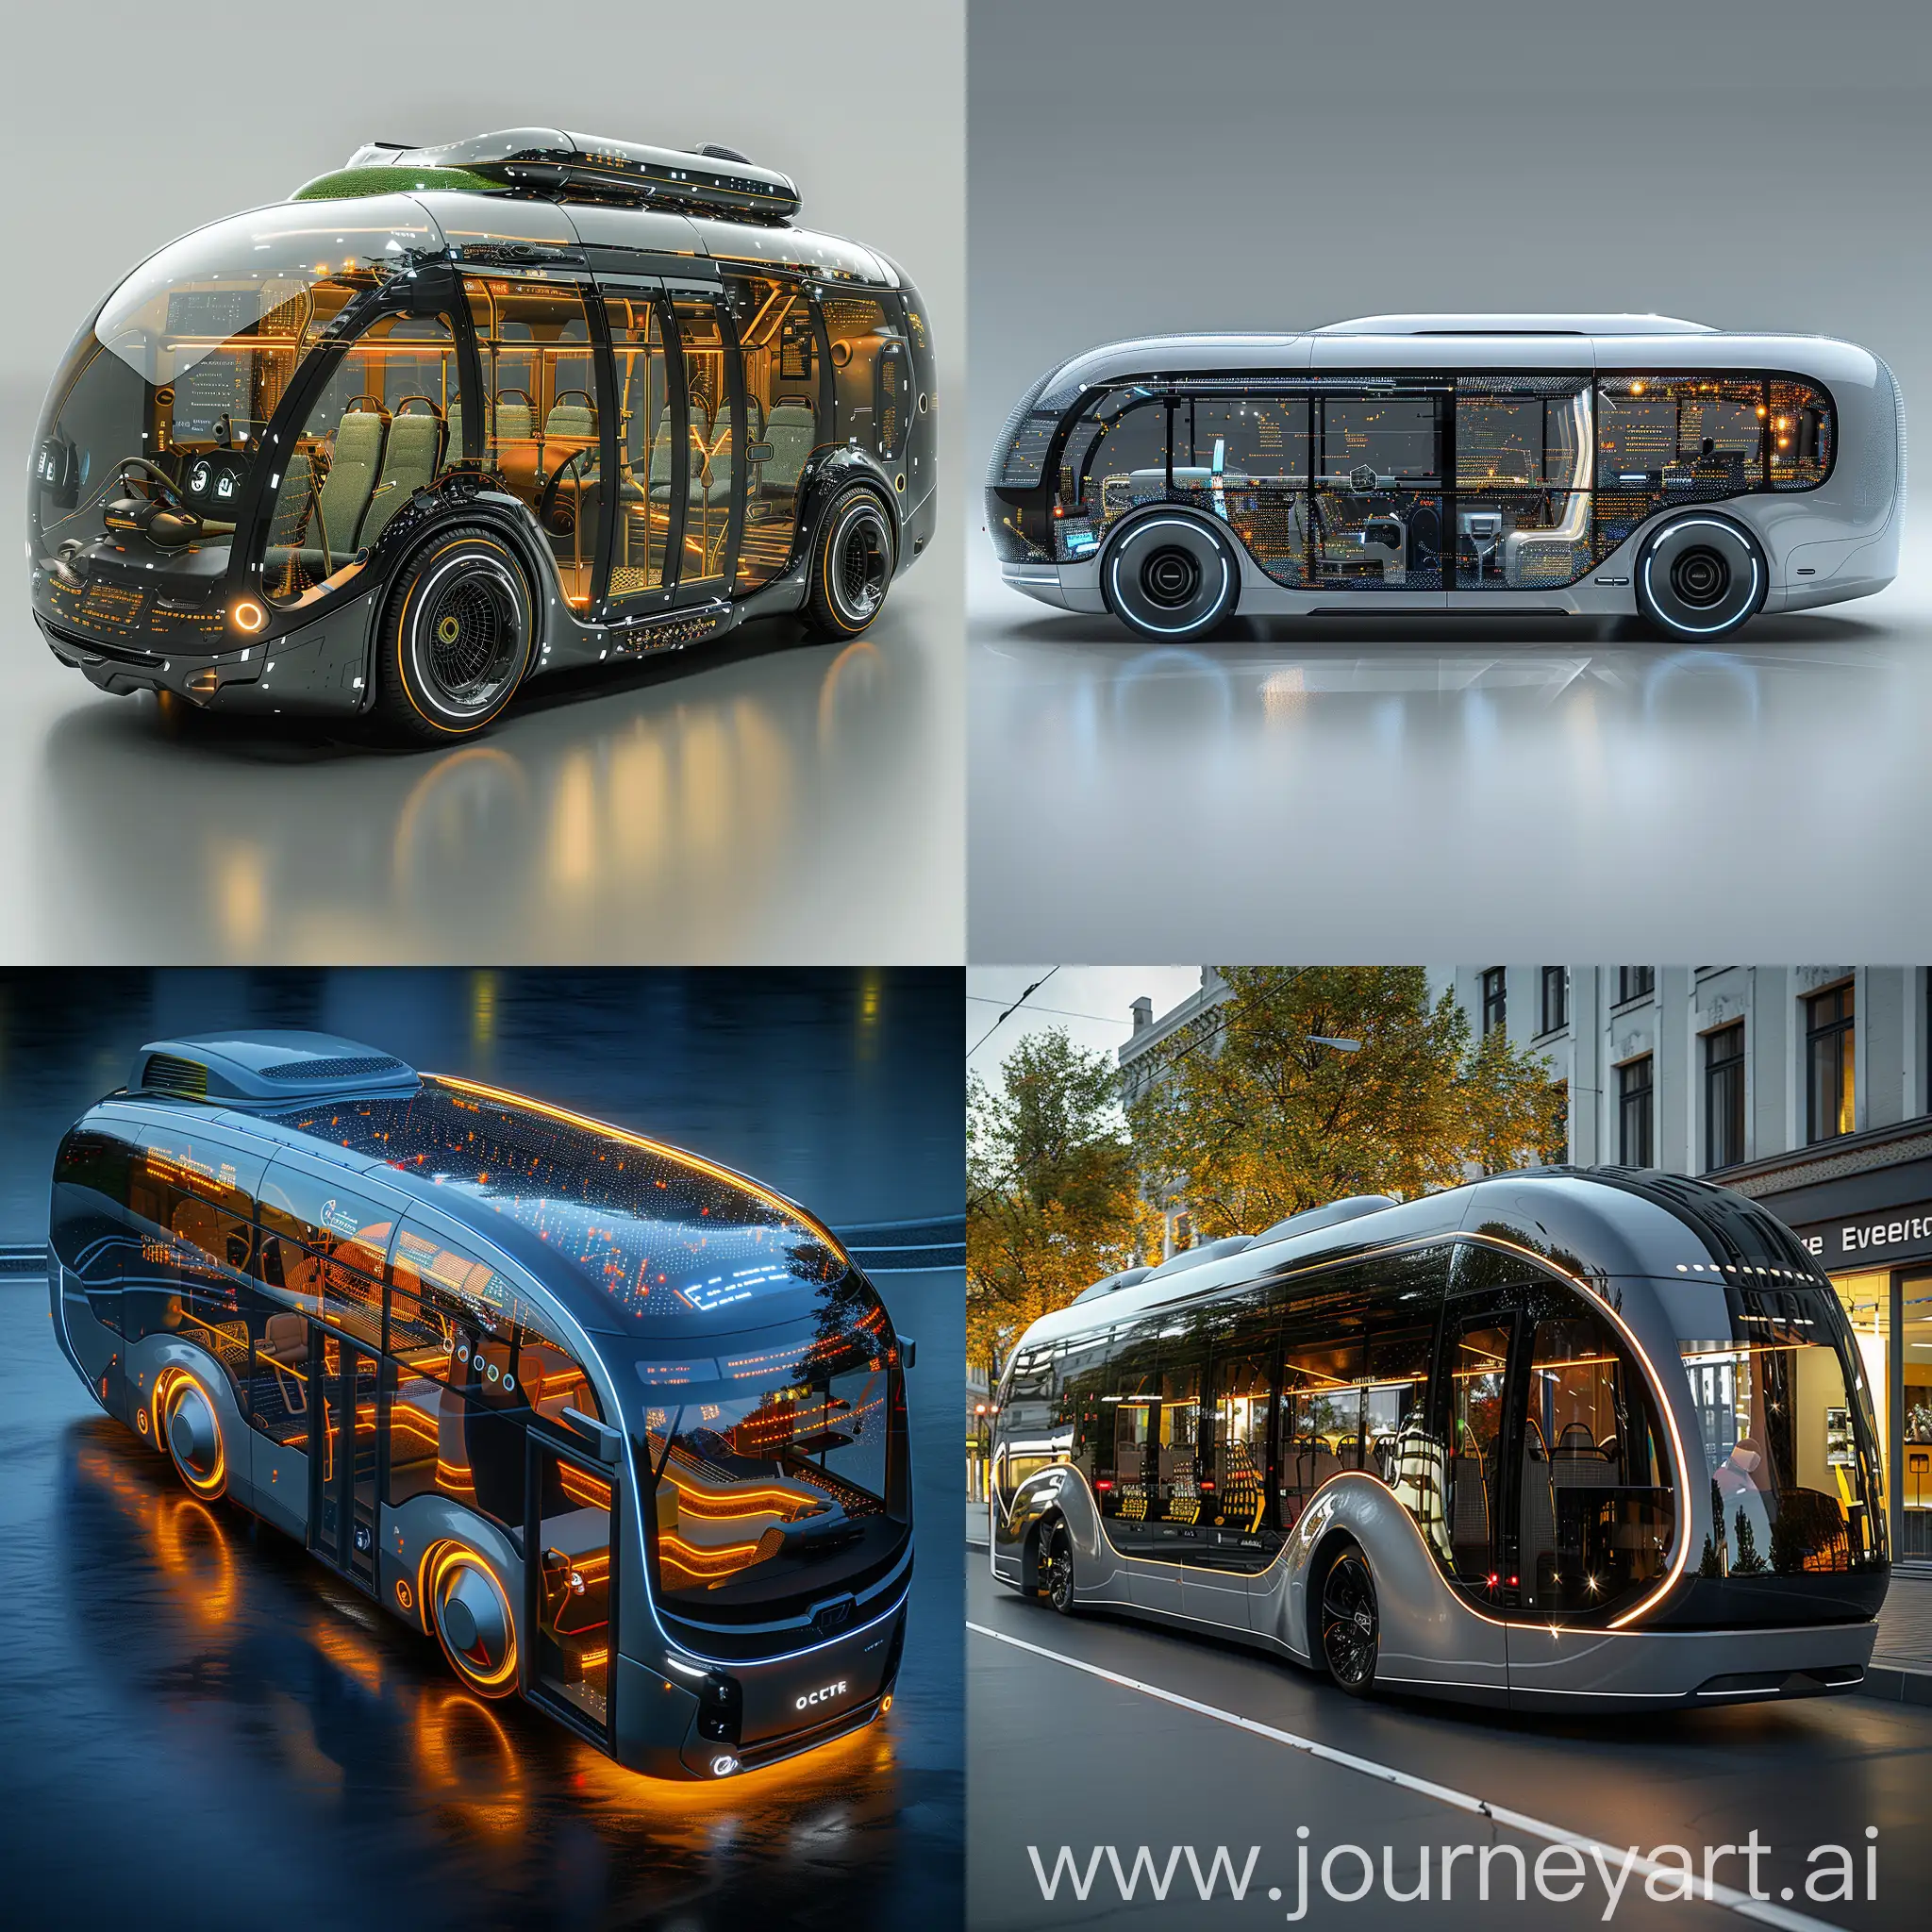 Futuristic bus, Electric Powertrain, Solar Panels, Regenerative Braking, Green Roof, Recycled Materials, Hydrogen Fuel Cells, Energy-Efficient LED Lighting, Automatic Shut-Off Systems, Low Rolling Resistance Tires, Smart Energy Management System, Autonomous Driving, Advanced Safety Systems, Augmented Reality Windows, Biometric Sensors, Wireless Charging Stations, AI-Powered Navigation System, Onboard Wi-Fi, Smart Seating, Interactive Displays, Air Quality Monitoring System, Self-Healing Materials, Nanocoatings, Nanoparticle Air Filters, Nanotech Lubricants, Nanosensors, Nanogenerators, Nanomaterial Composites, Nanoparticle-based Energy Storage, Nanoscale Thermal Insulation, Nanotech Transparent Displays, octane render --stylize 1000